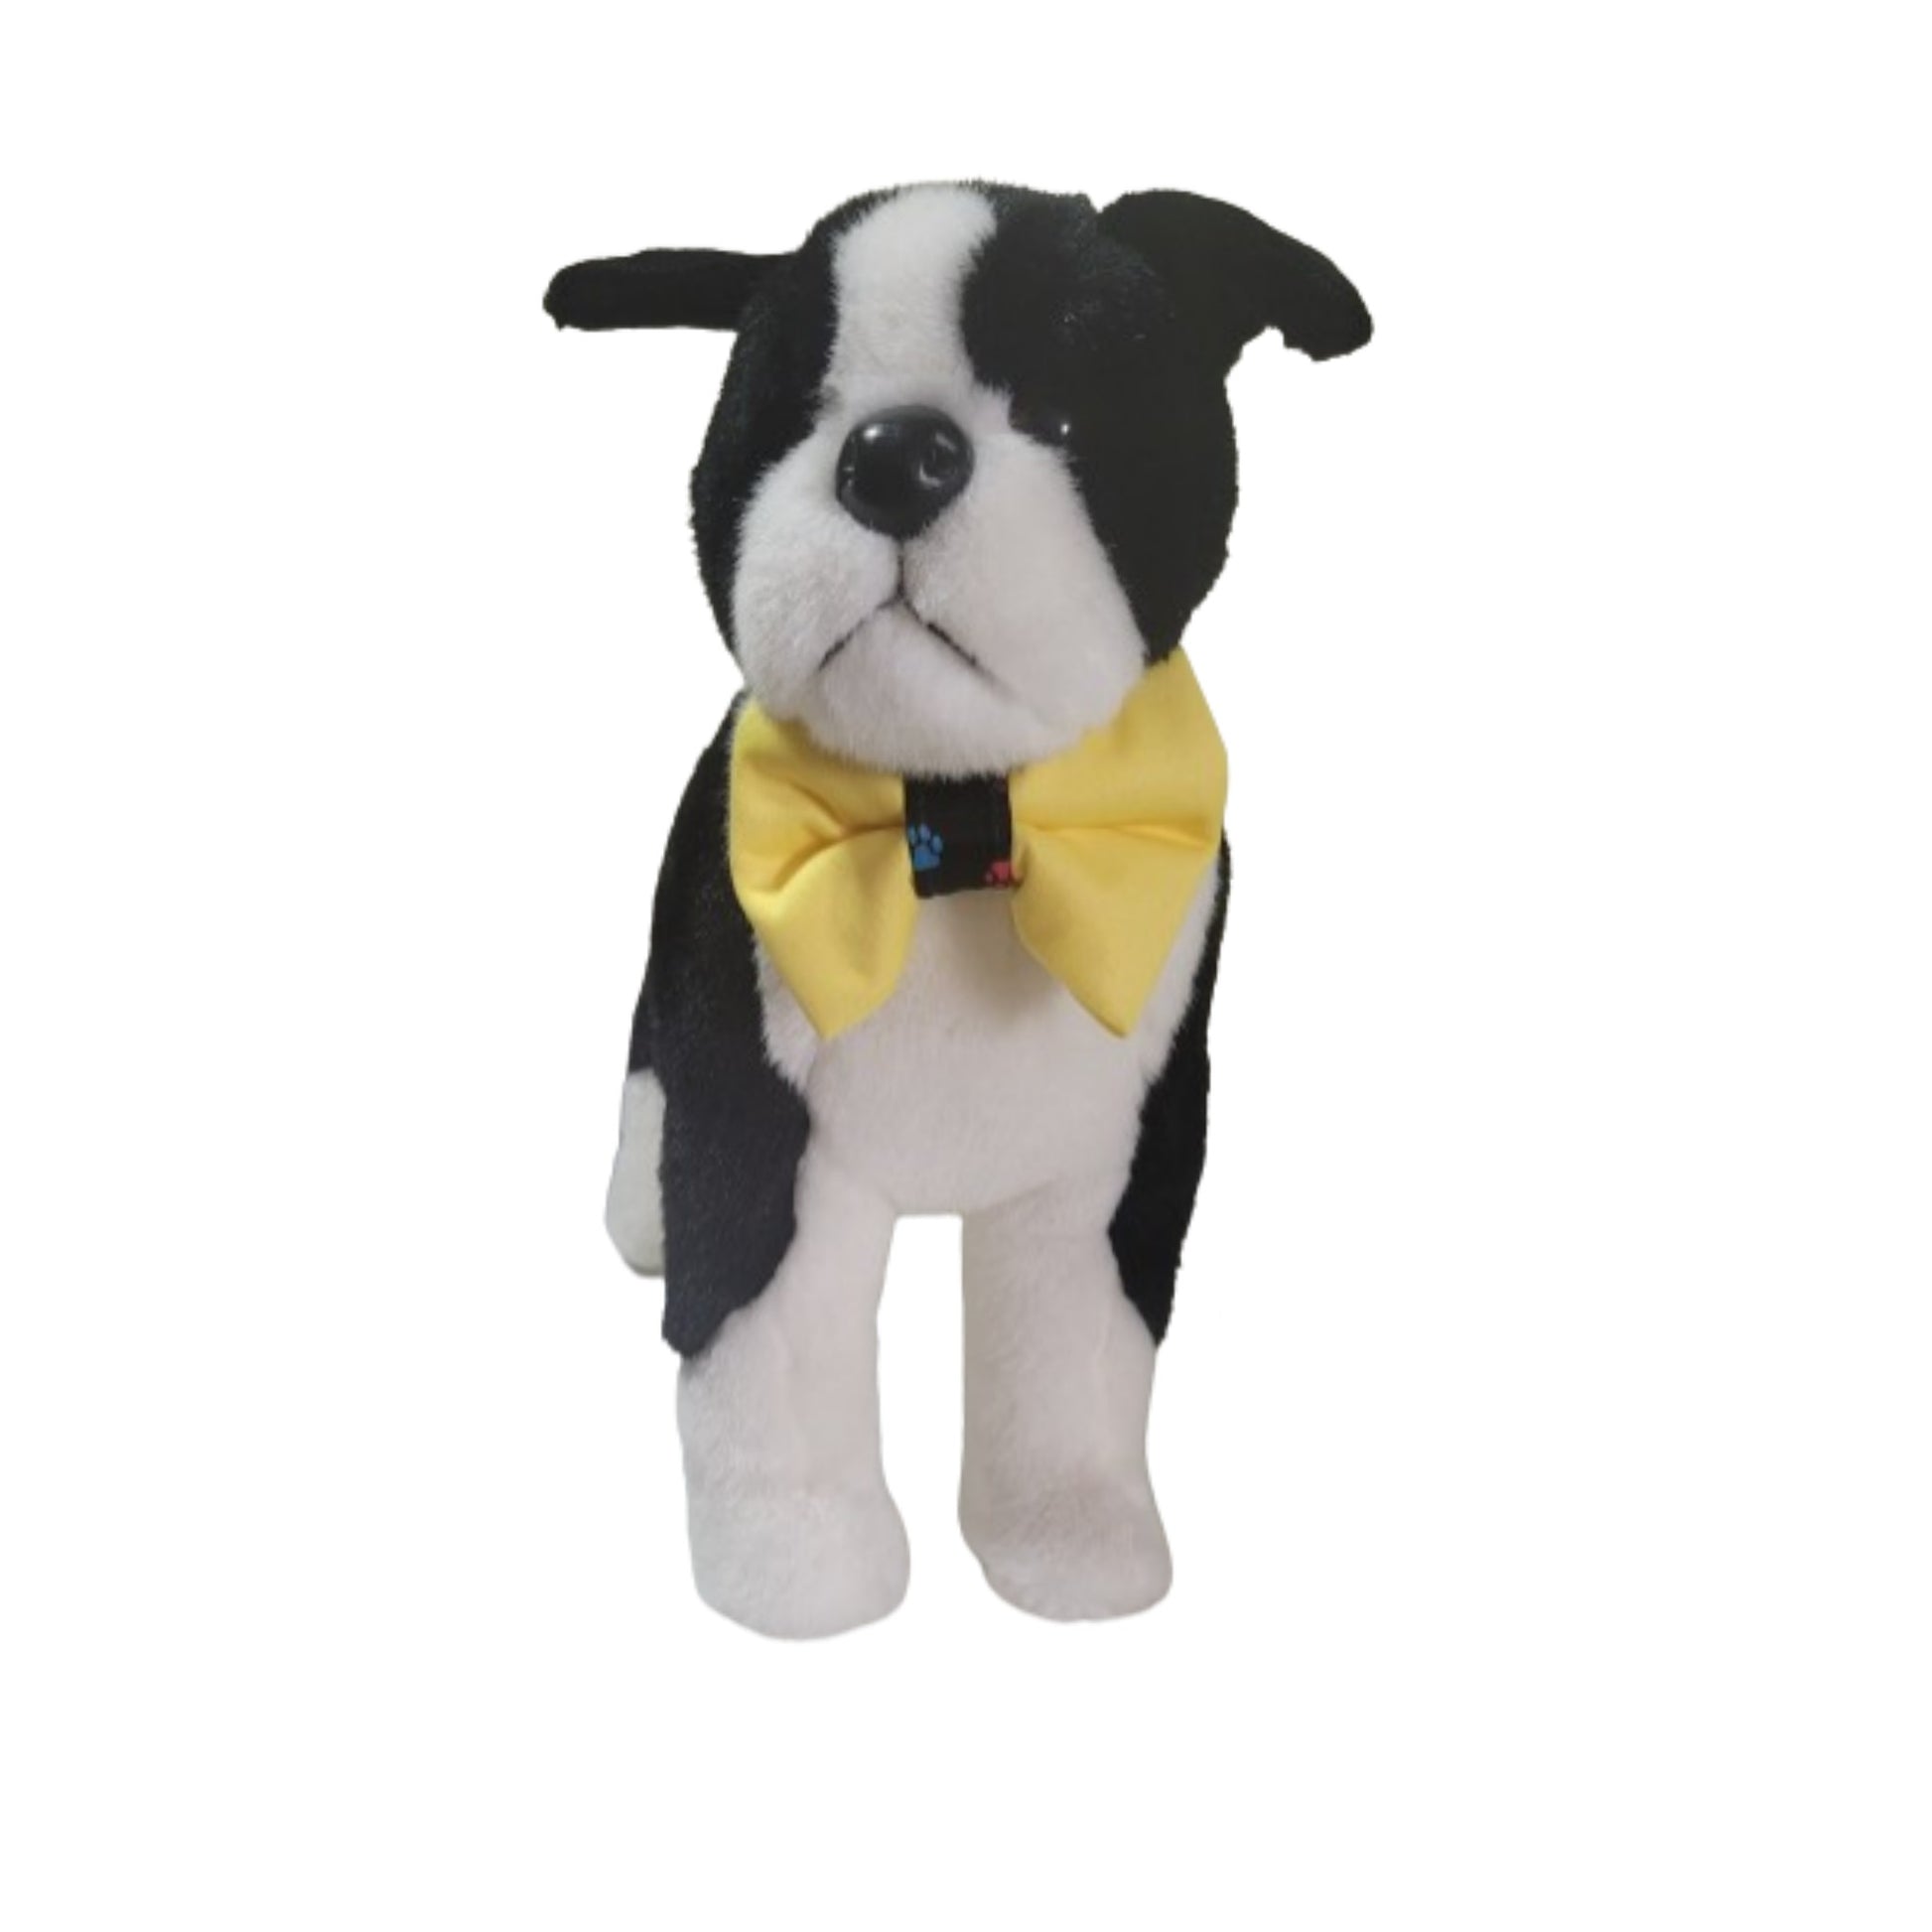 Dog Bow Tie | Dog Collar Bow Tie | Jack & Jill Dog Diapers